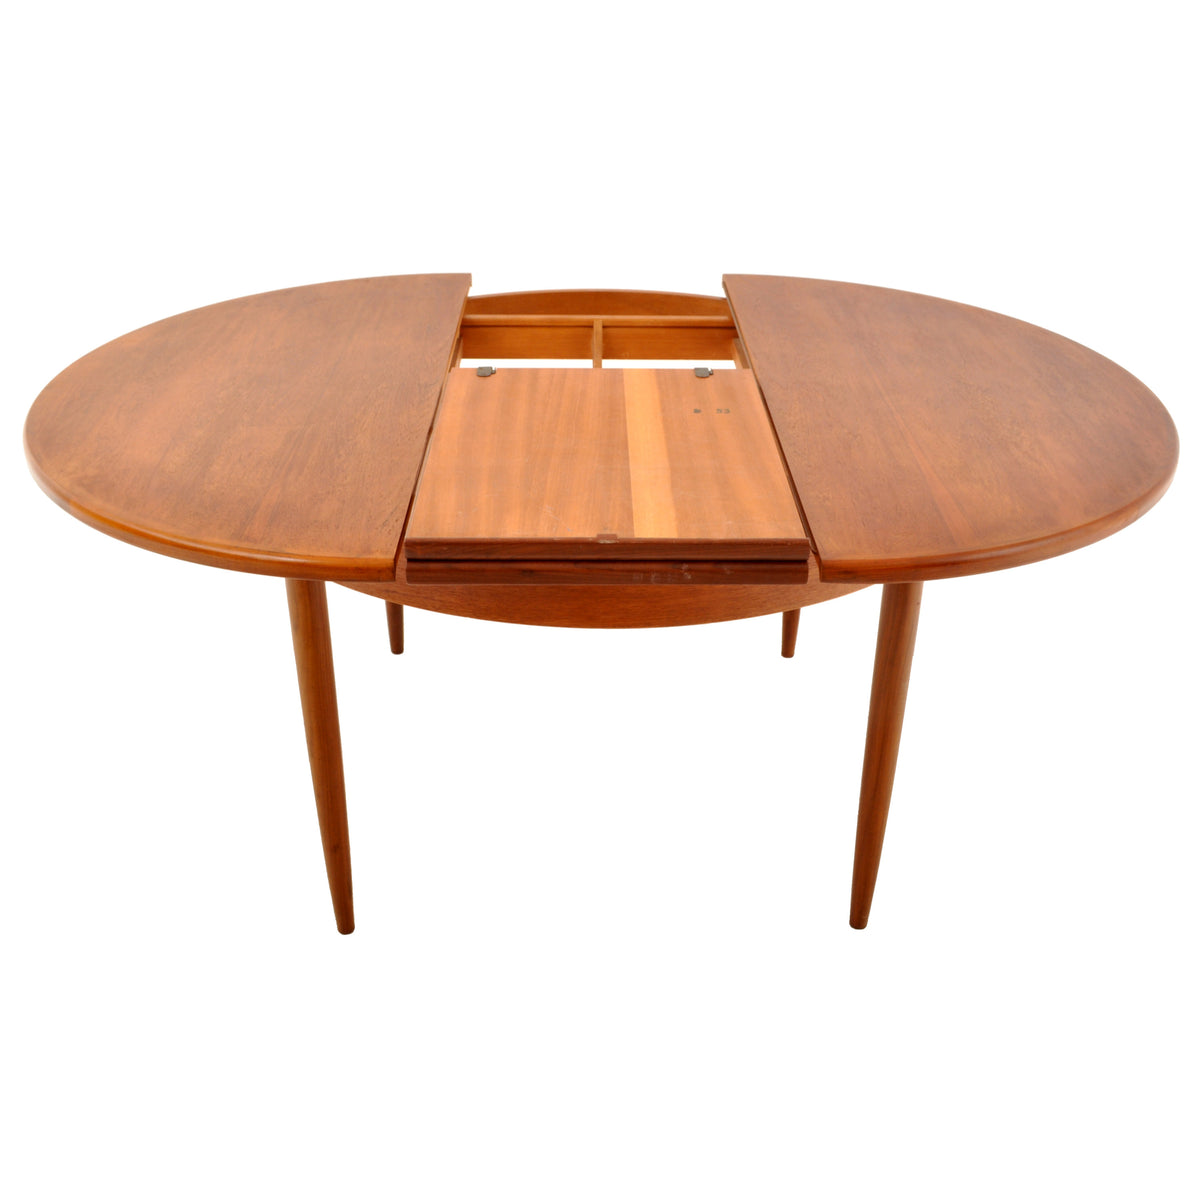 Mid-Century Modern Danish Style Teak Extension Dining Table by G Plan, 1960s